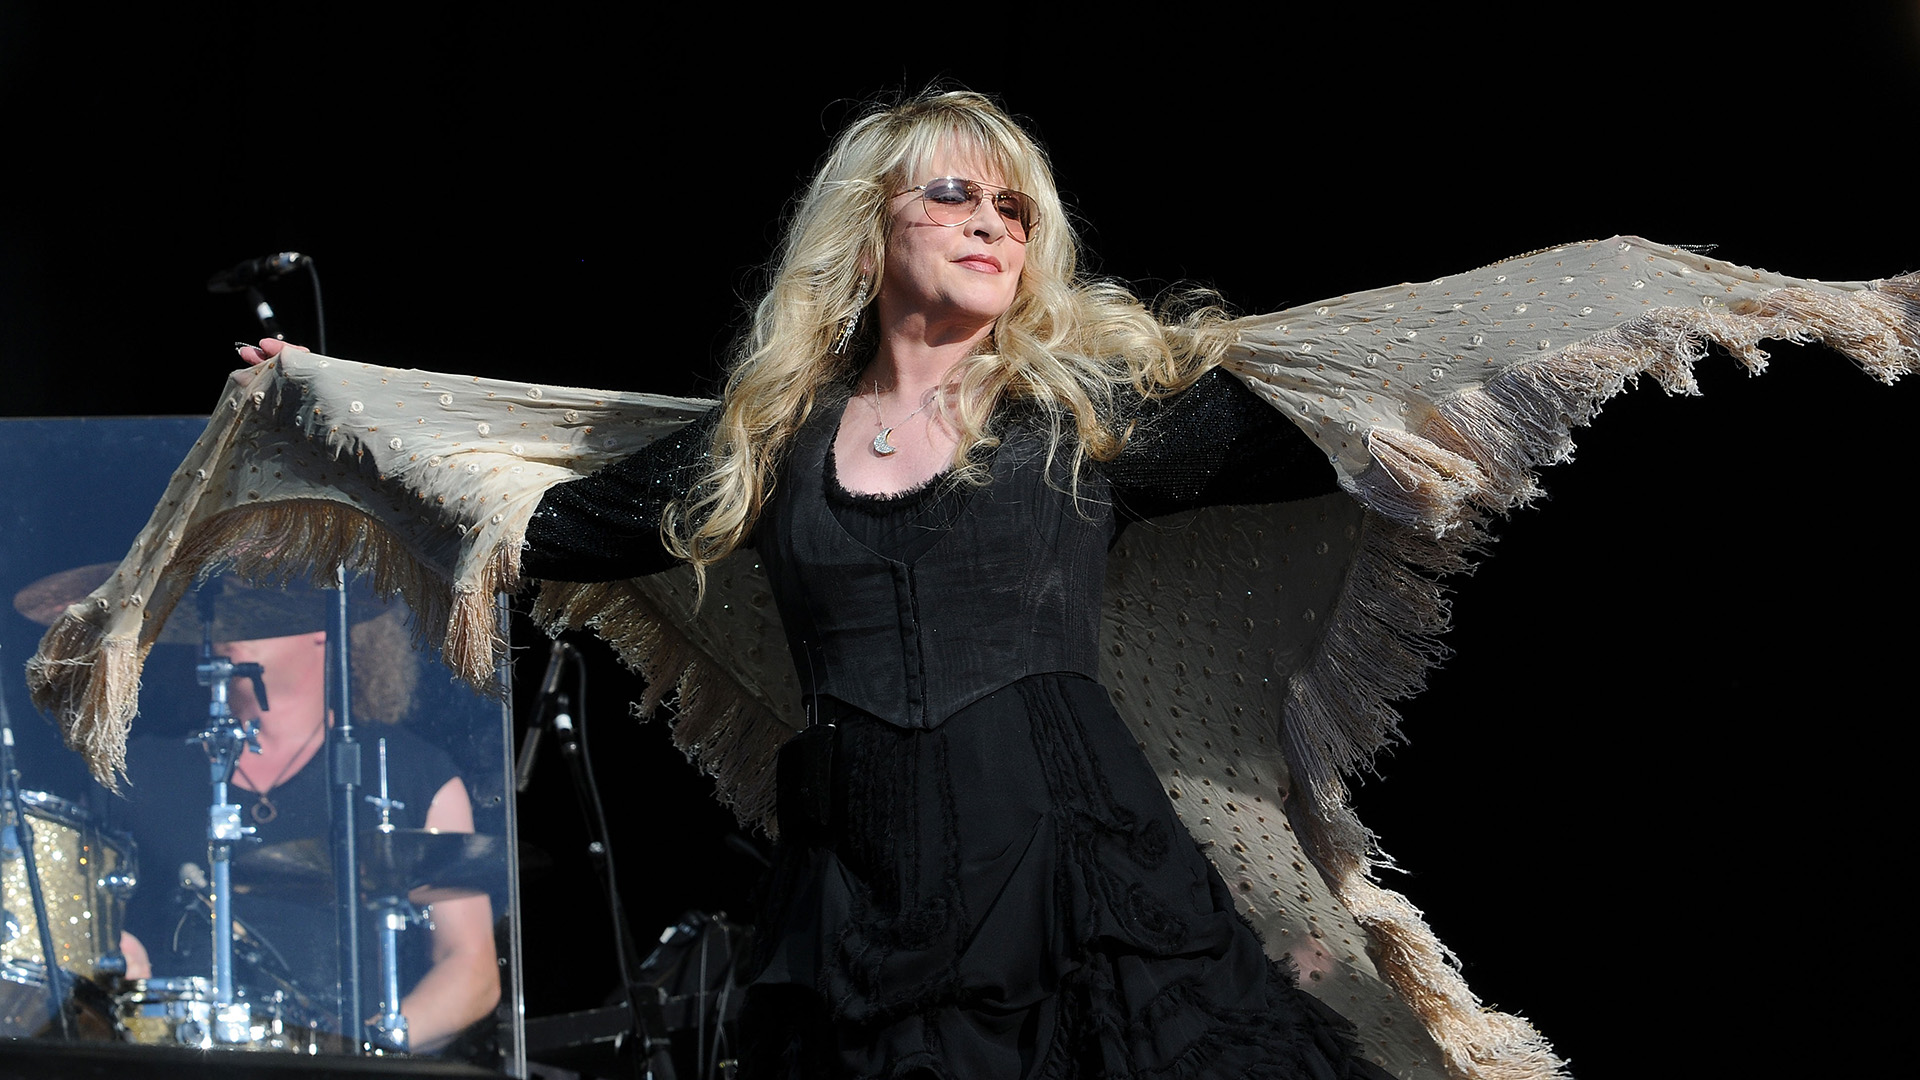 Stevie Nicks performs live on stage during the third day of the 'Hard Rock Calling' music festival at Hyde Park on June 26, 2011 in central London, England.